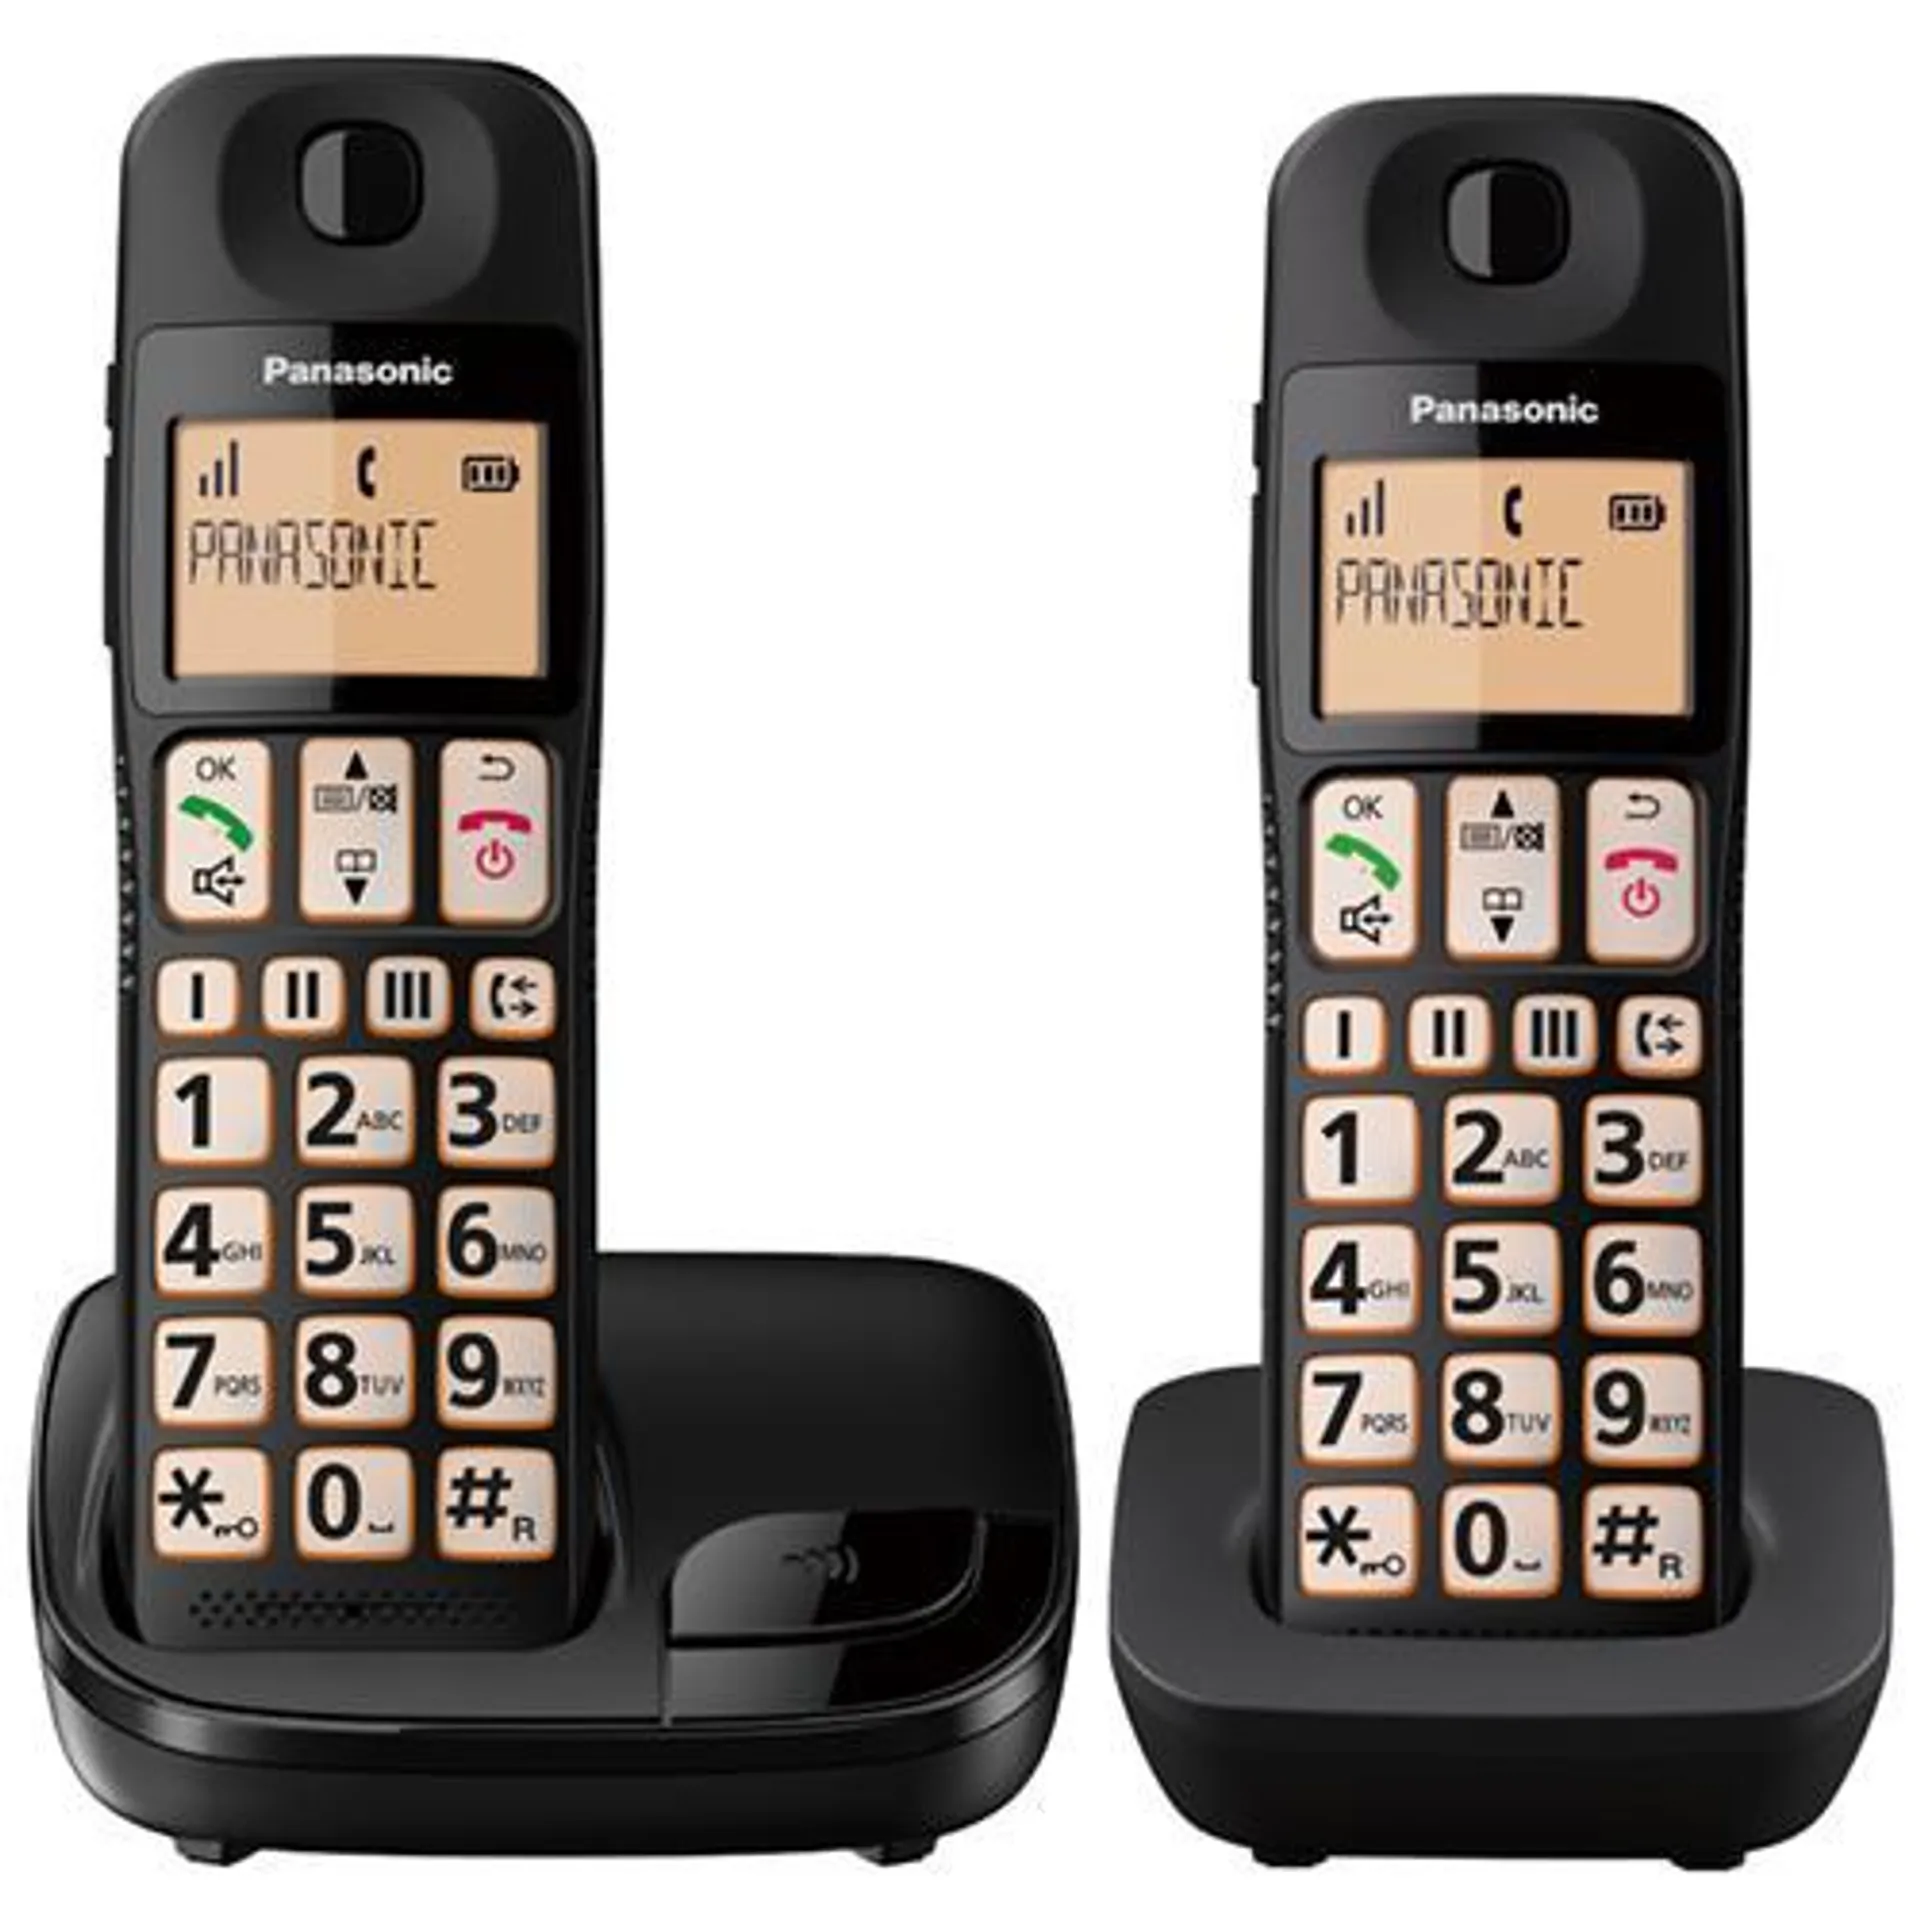 PANASONIC DECT BIG BUTTON TWIN PACK